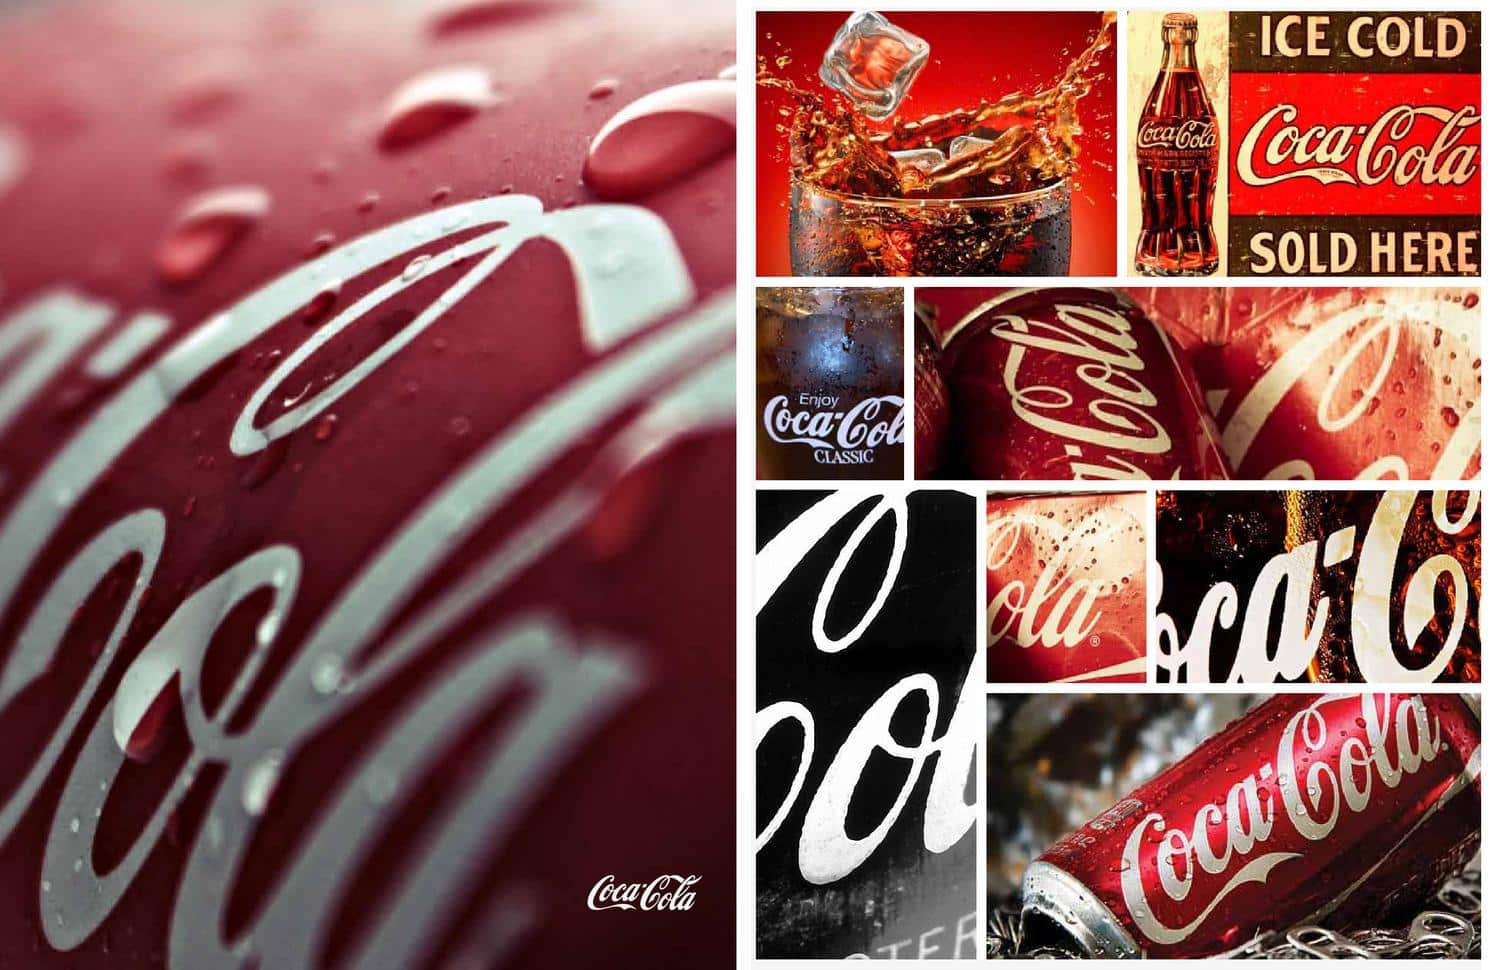 Coca-Cola measures consumer-driven marketing at each stage of the decision journey.